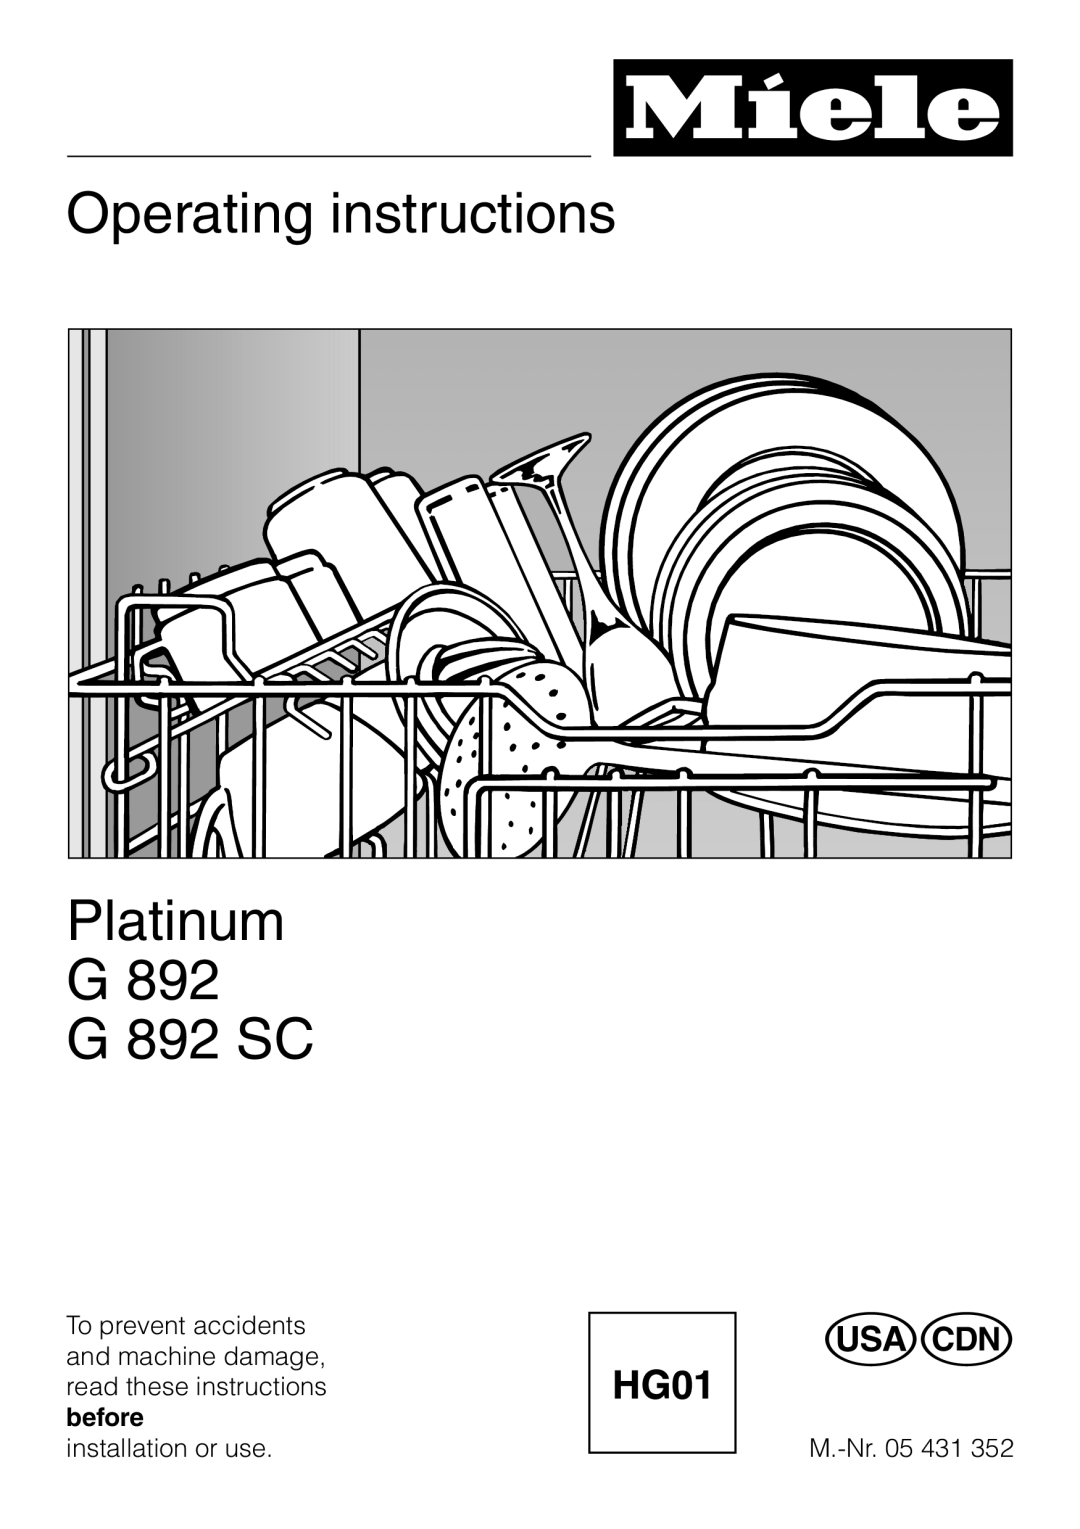 Miele G892SC operating instructions Operating instructions, Platinum, G 892 SC 